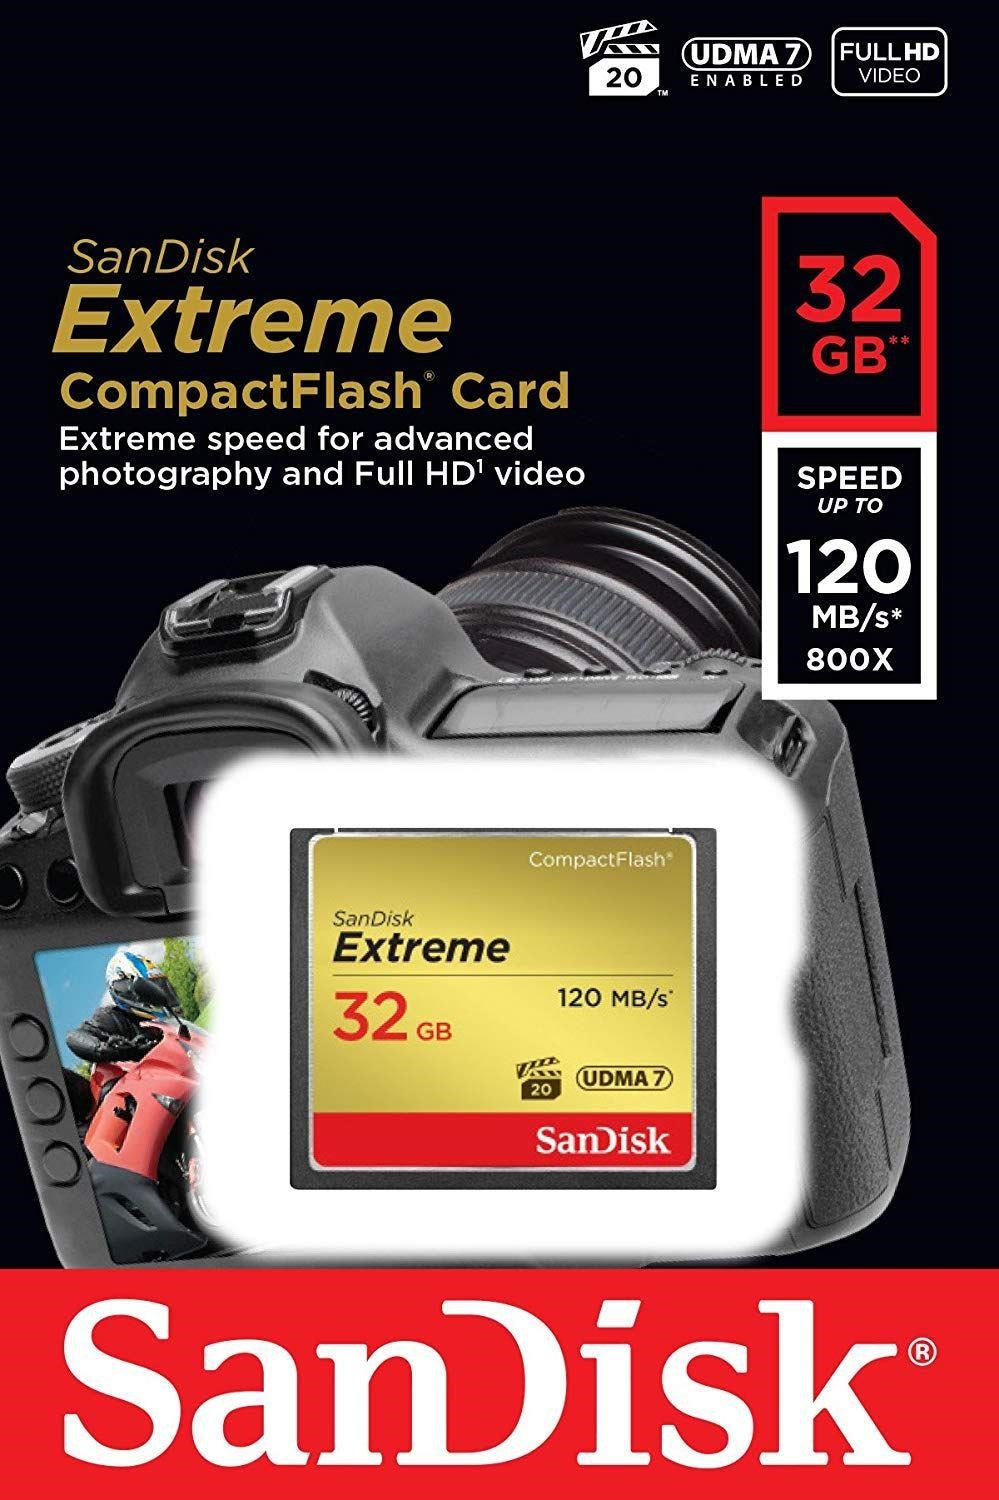 Product Image of SanDisk 32GB Extreme Compact Flash Memory Card 120MB/S - Black/Gold